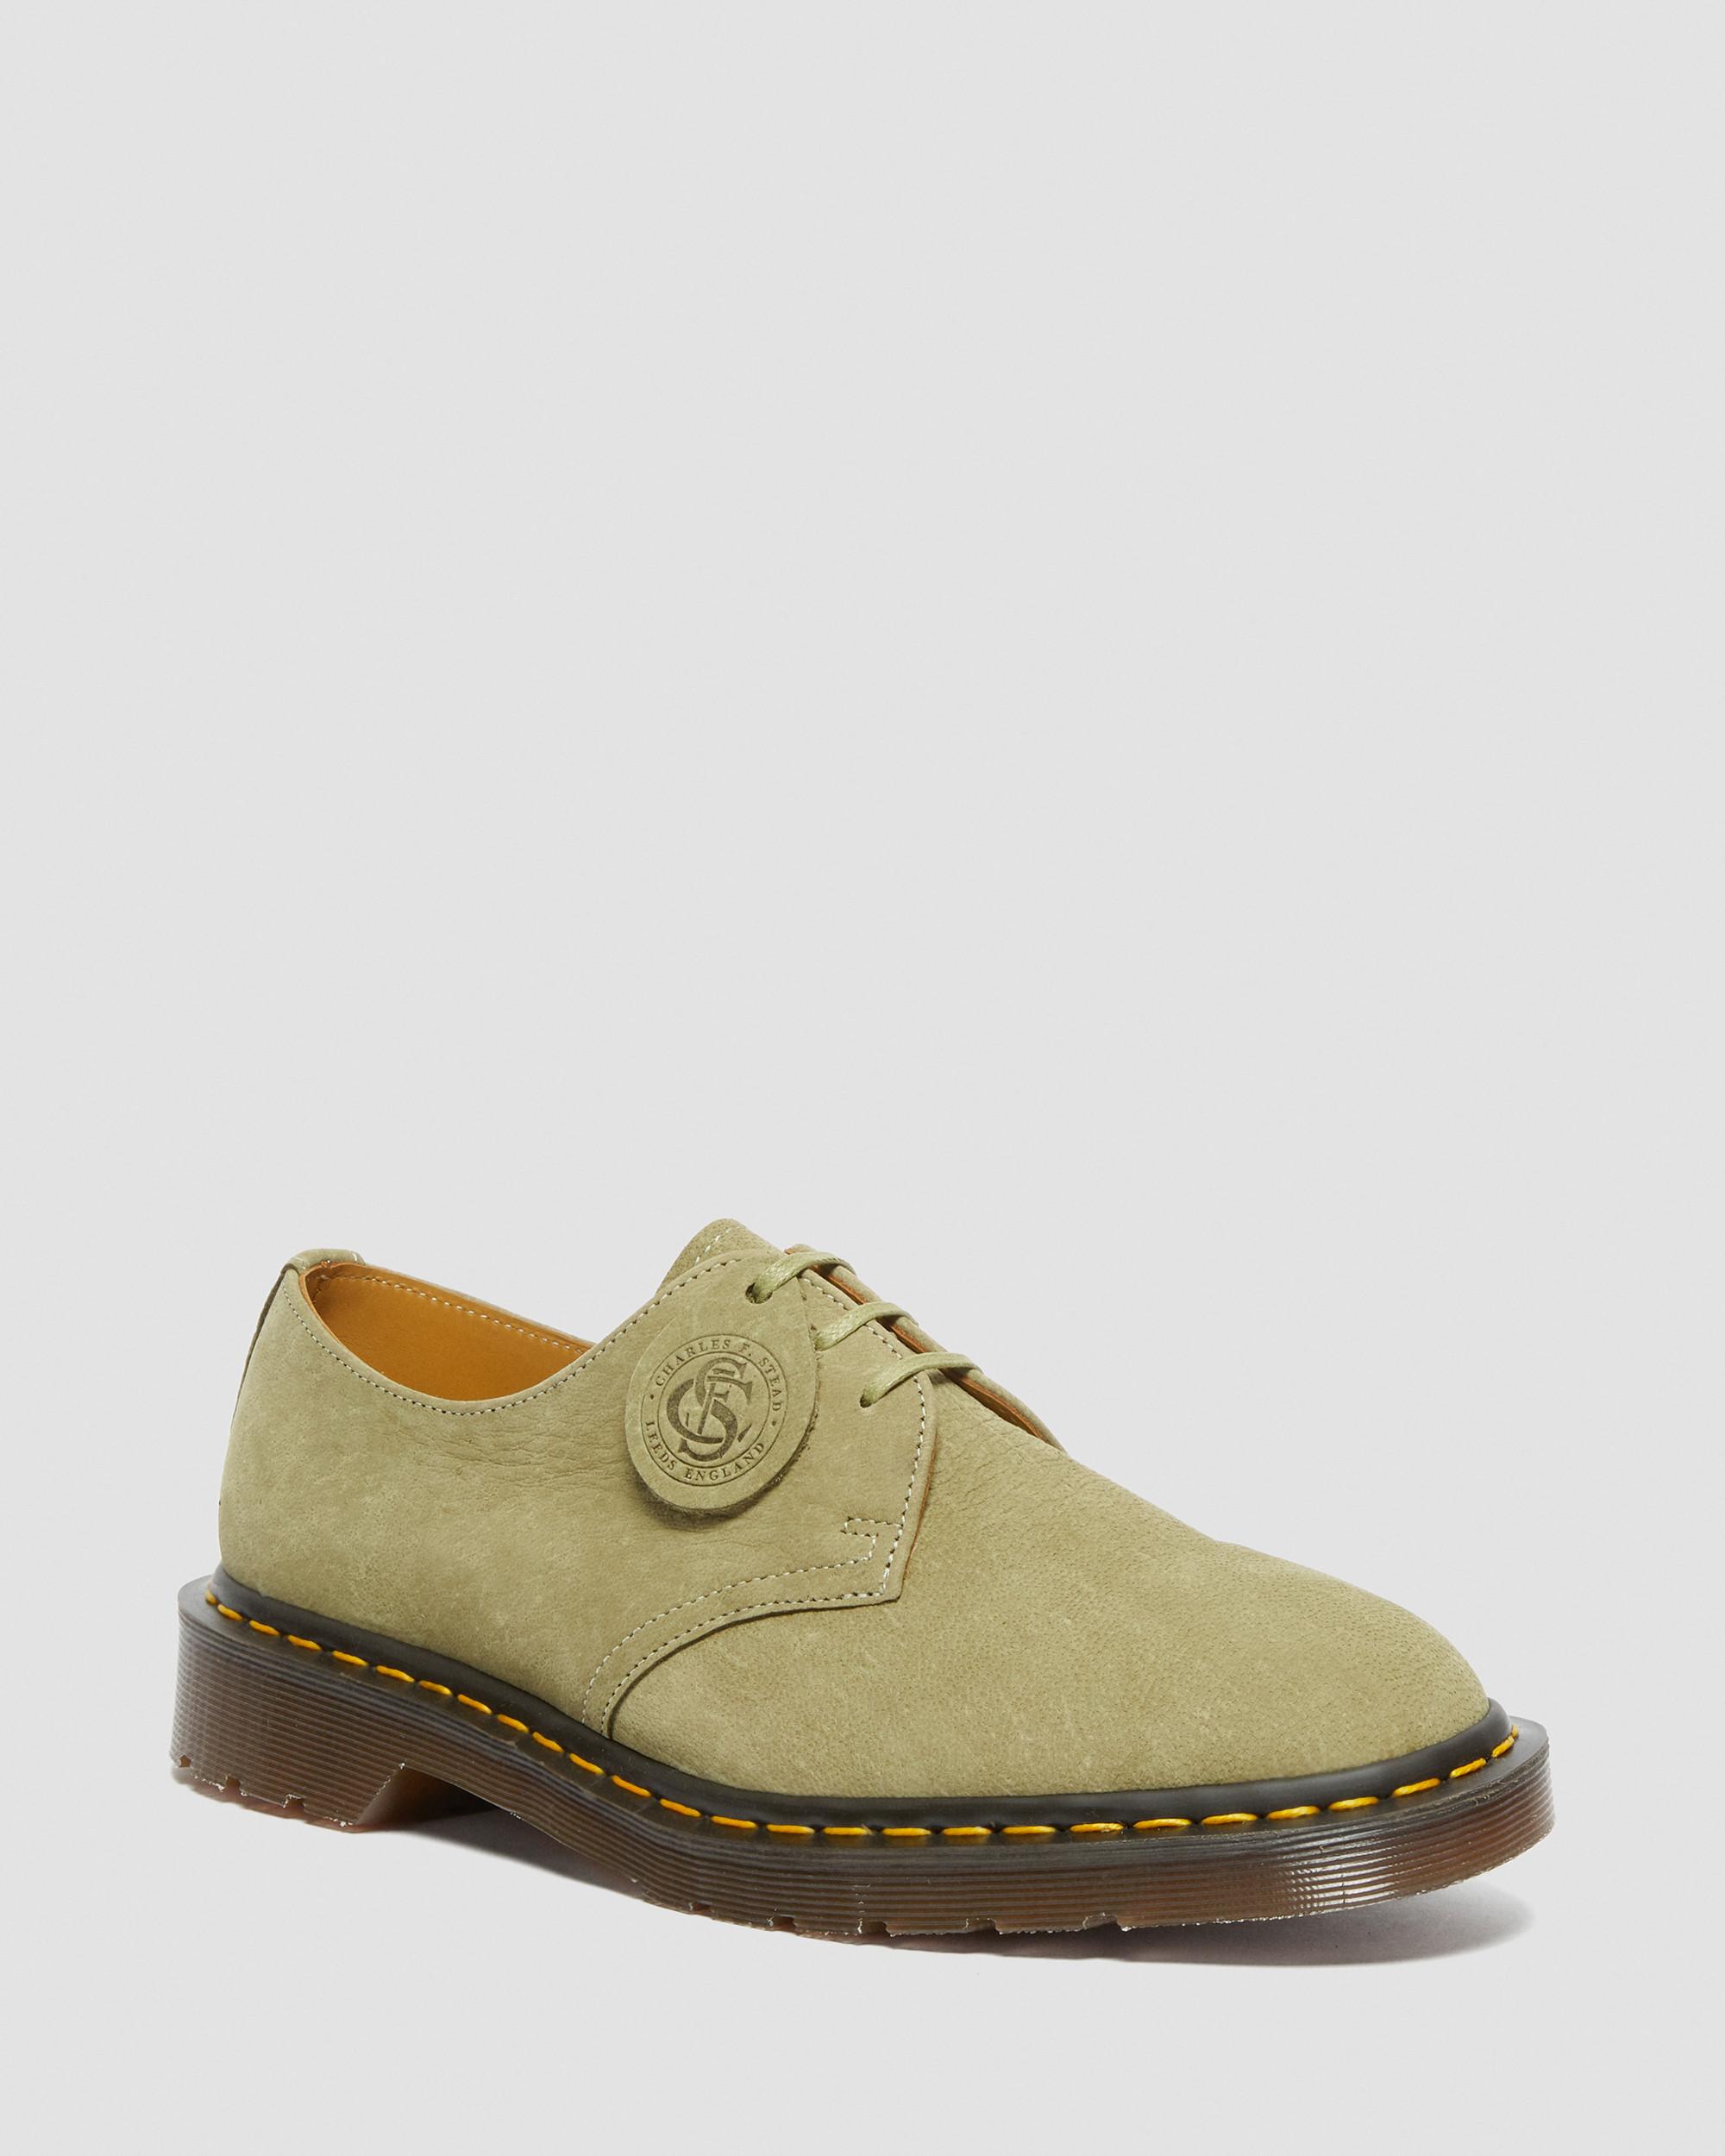 1461 Made in England Nubuck Leather Oxford Shoes, Green | Dr. Martens